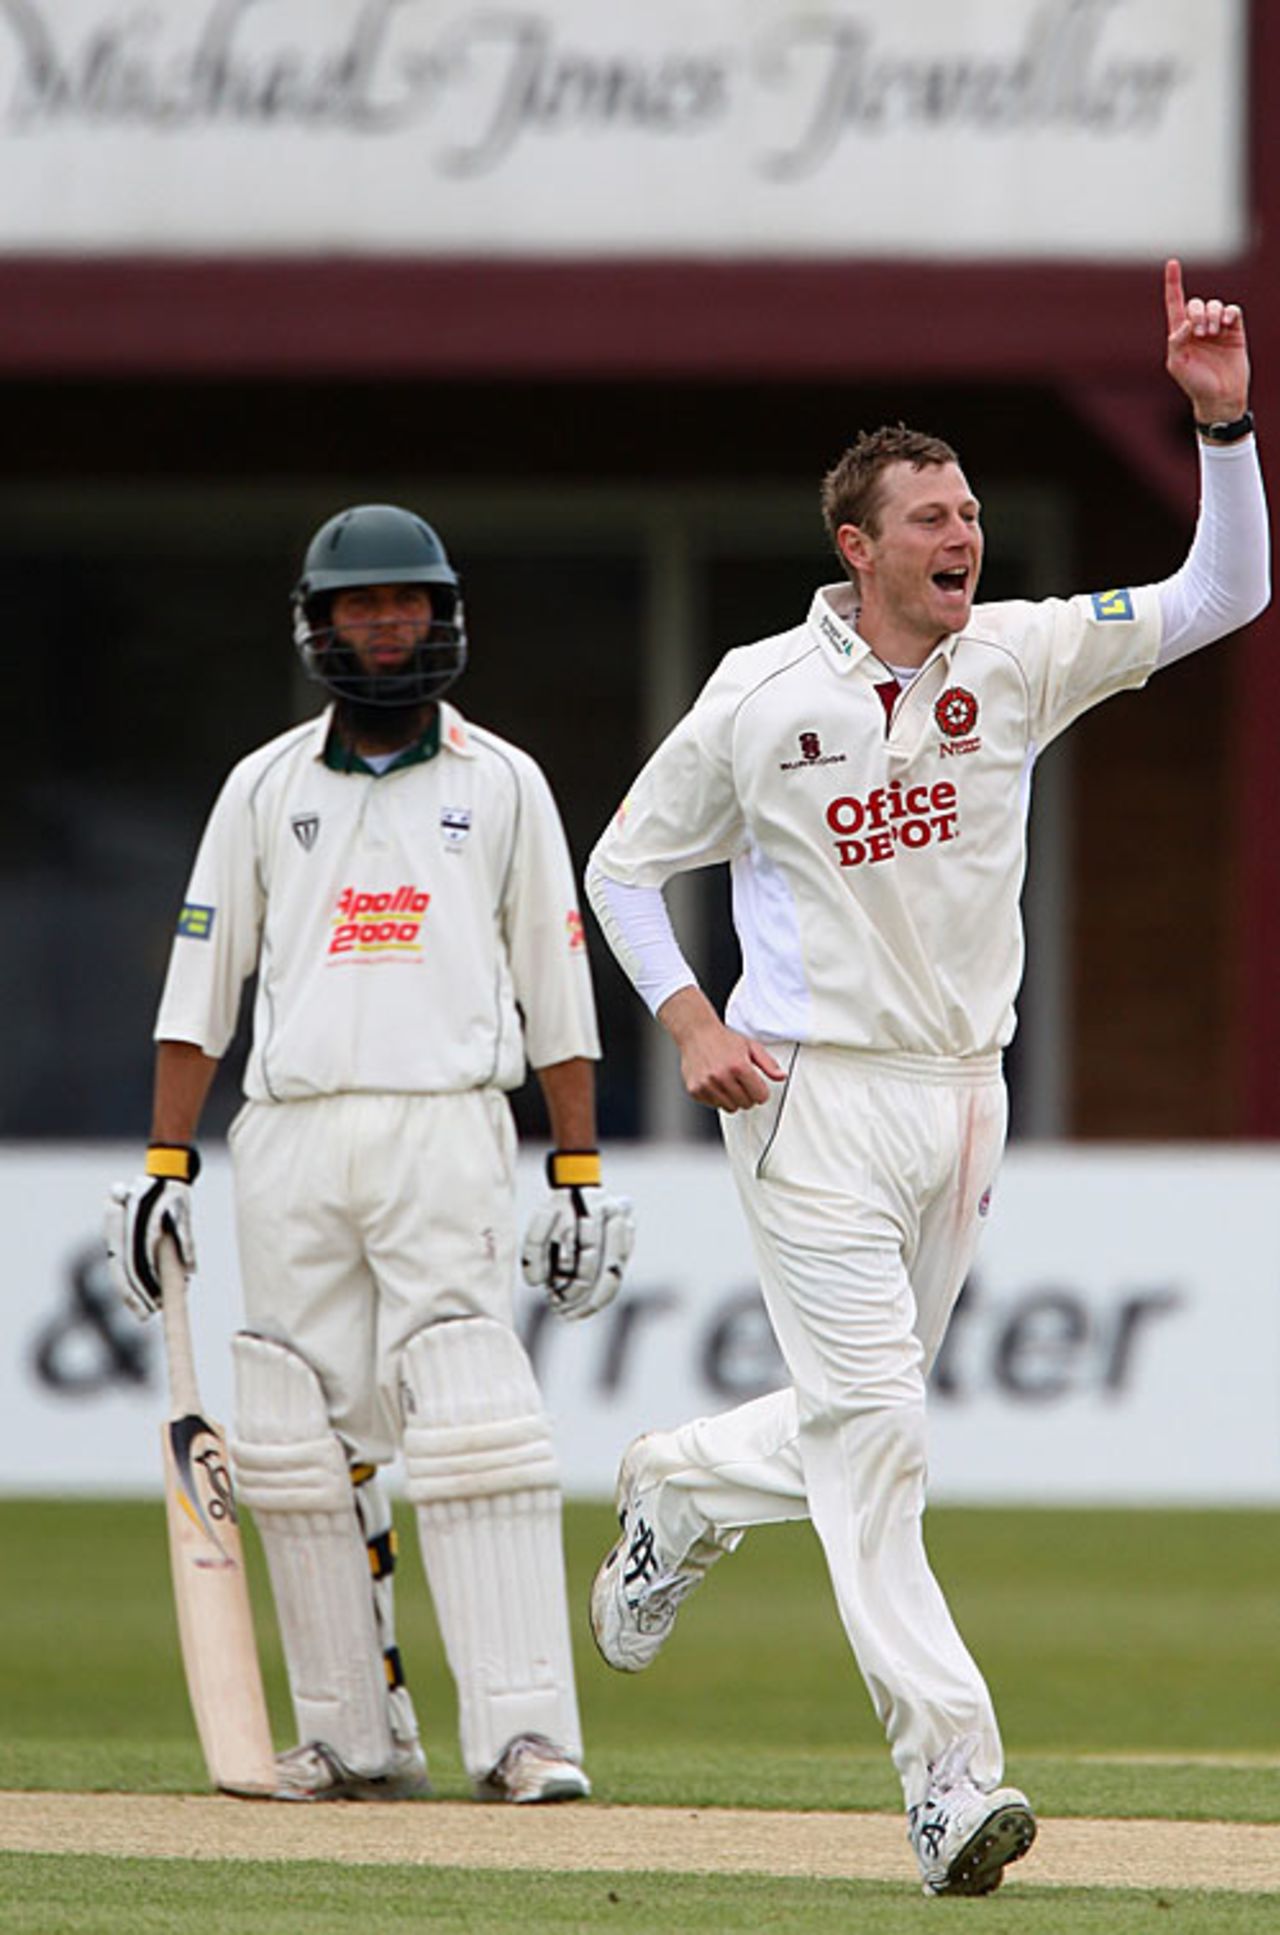 David Lucas celebrates the wicket of Ben Smith, Northamptonshire v Worcestershire, Northampton, May 2, 2008